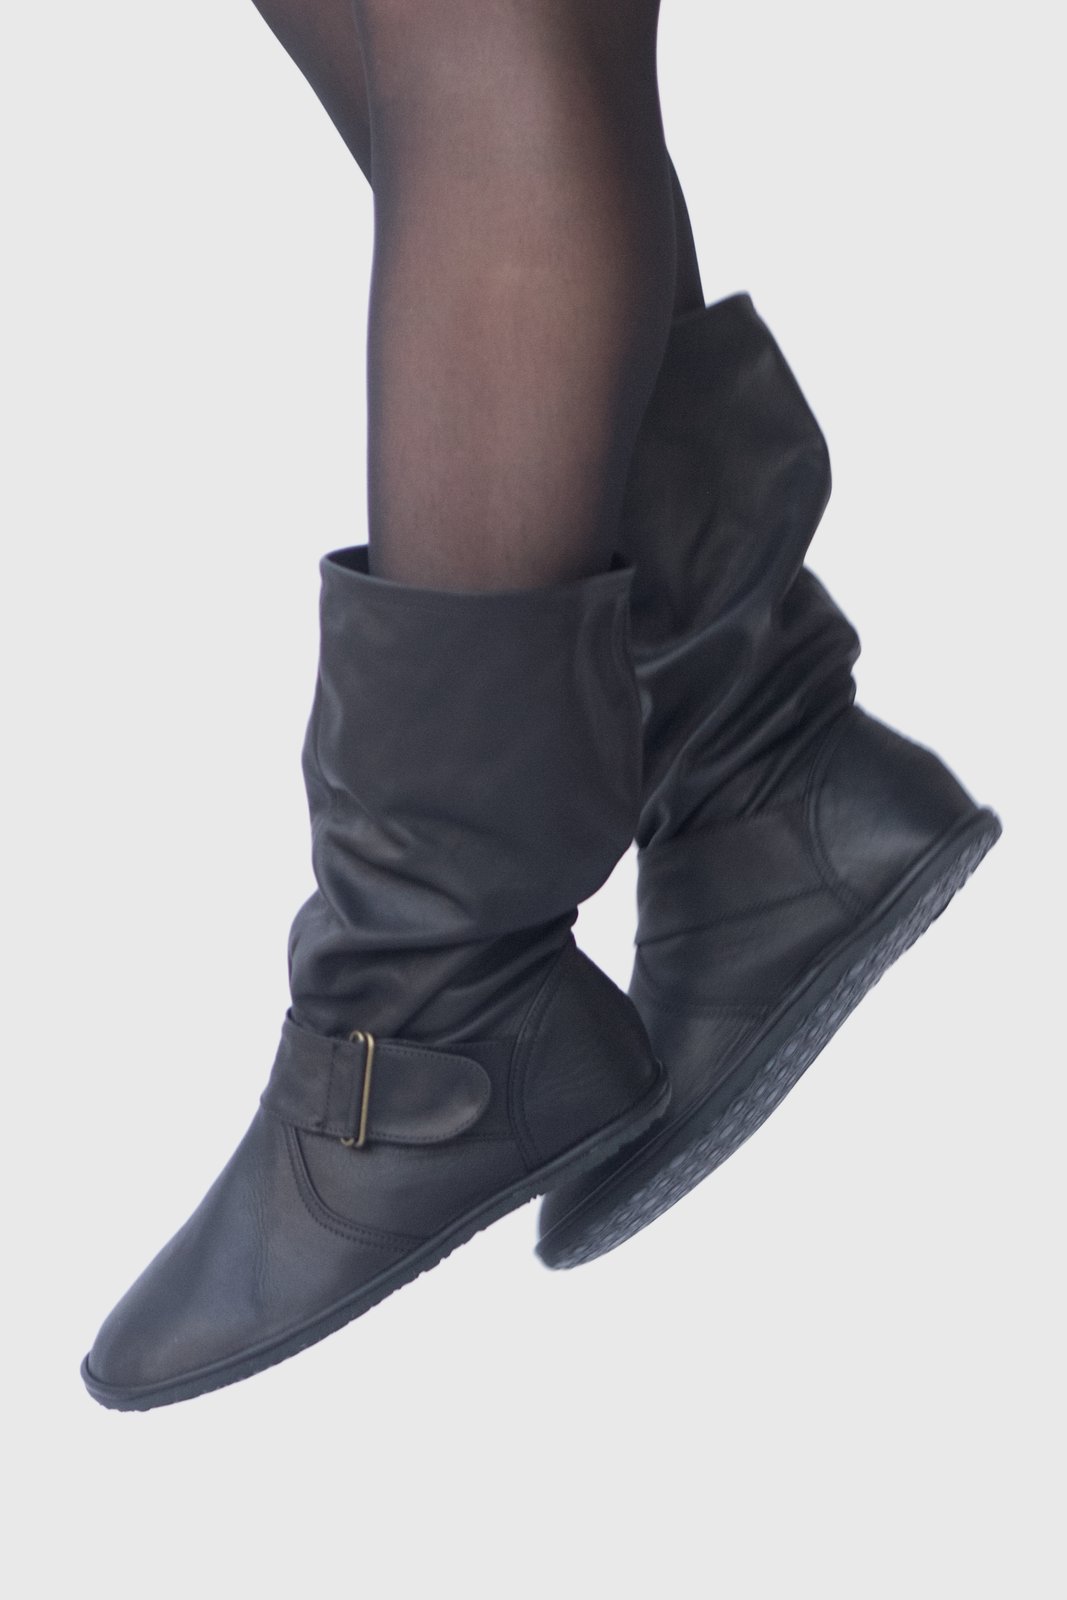 black leather slouch boots flat